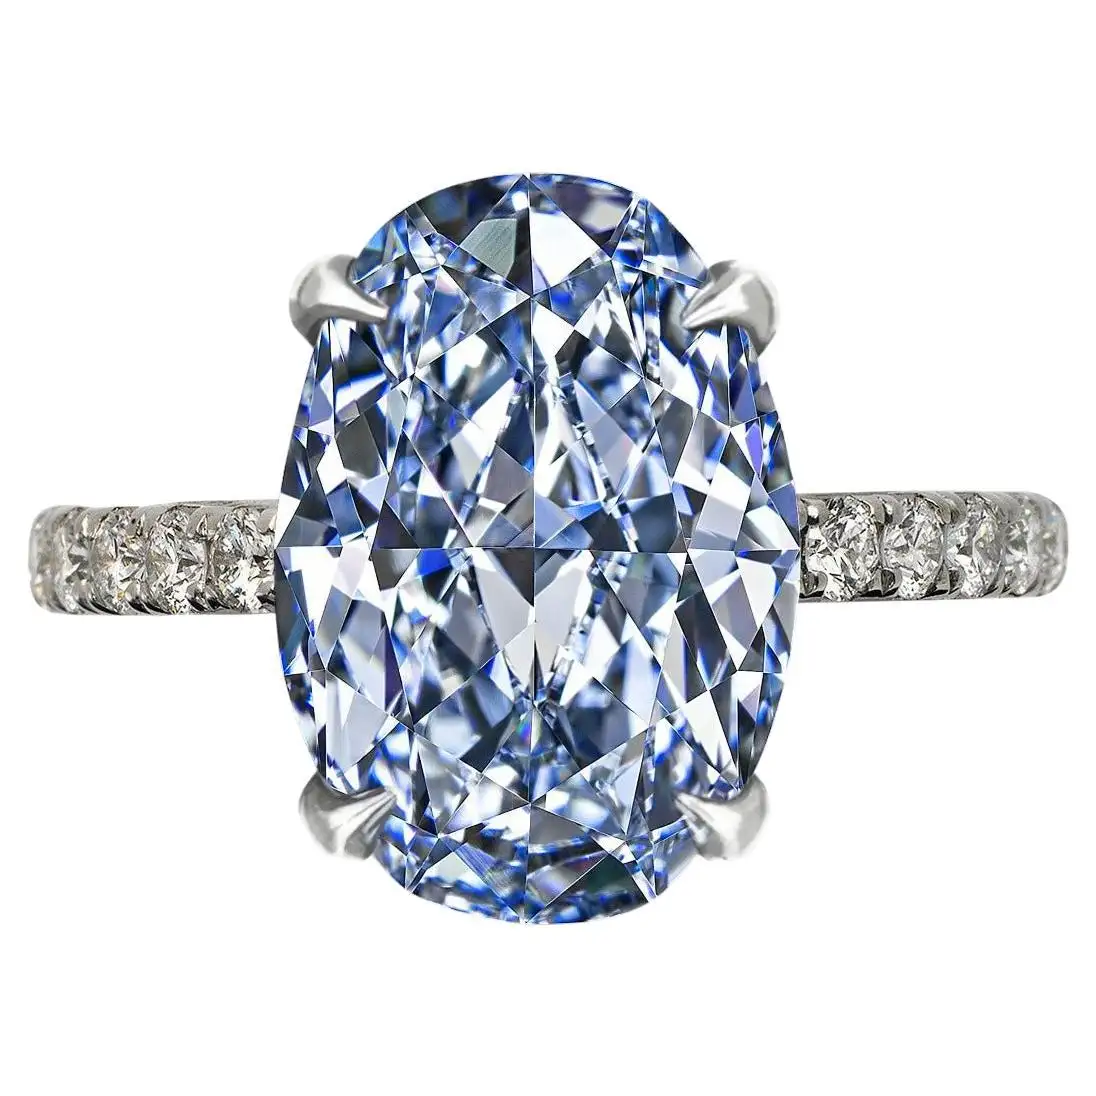 Exceptional GIA Certified 2 Carat Fancy Blue Diamond Solitaire Ring